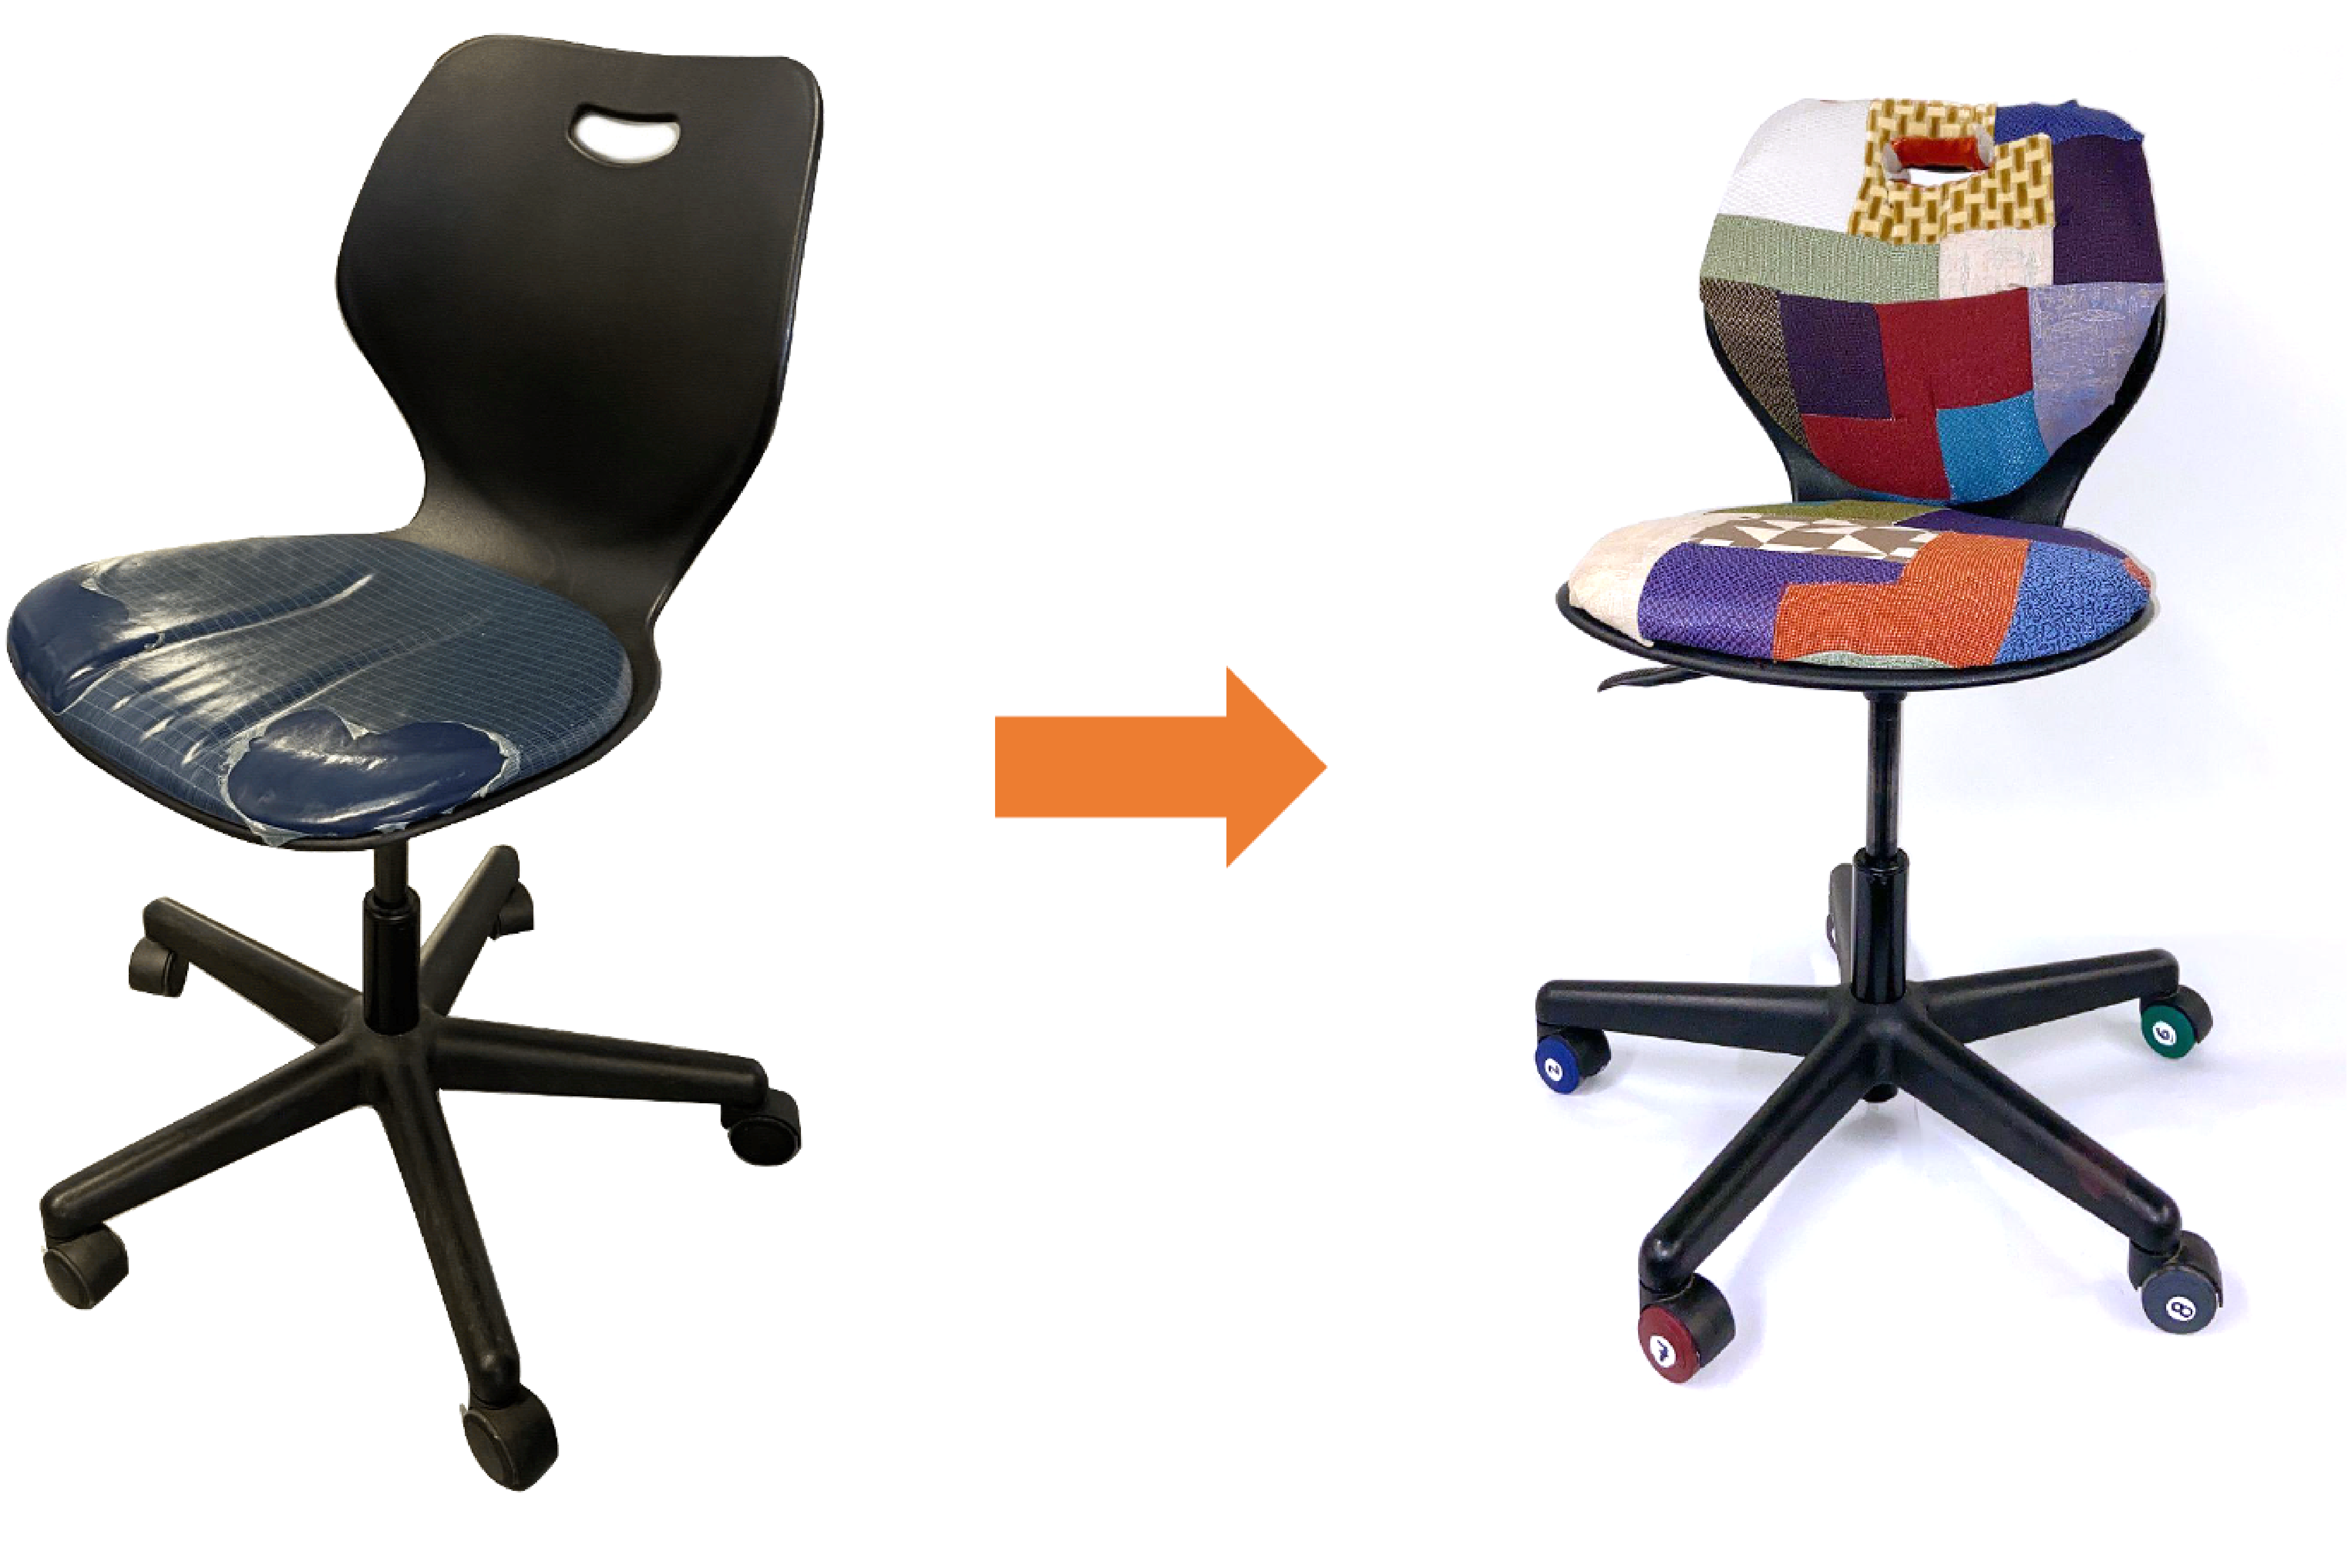 Image showing a worn-out office chair on the left and orange arrow pointing to the repaired version on the right side of the image.